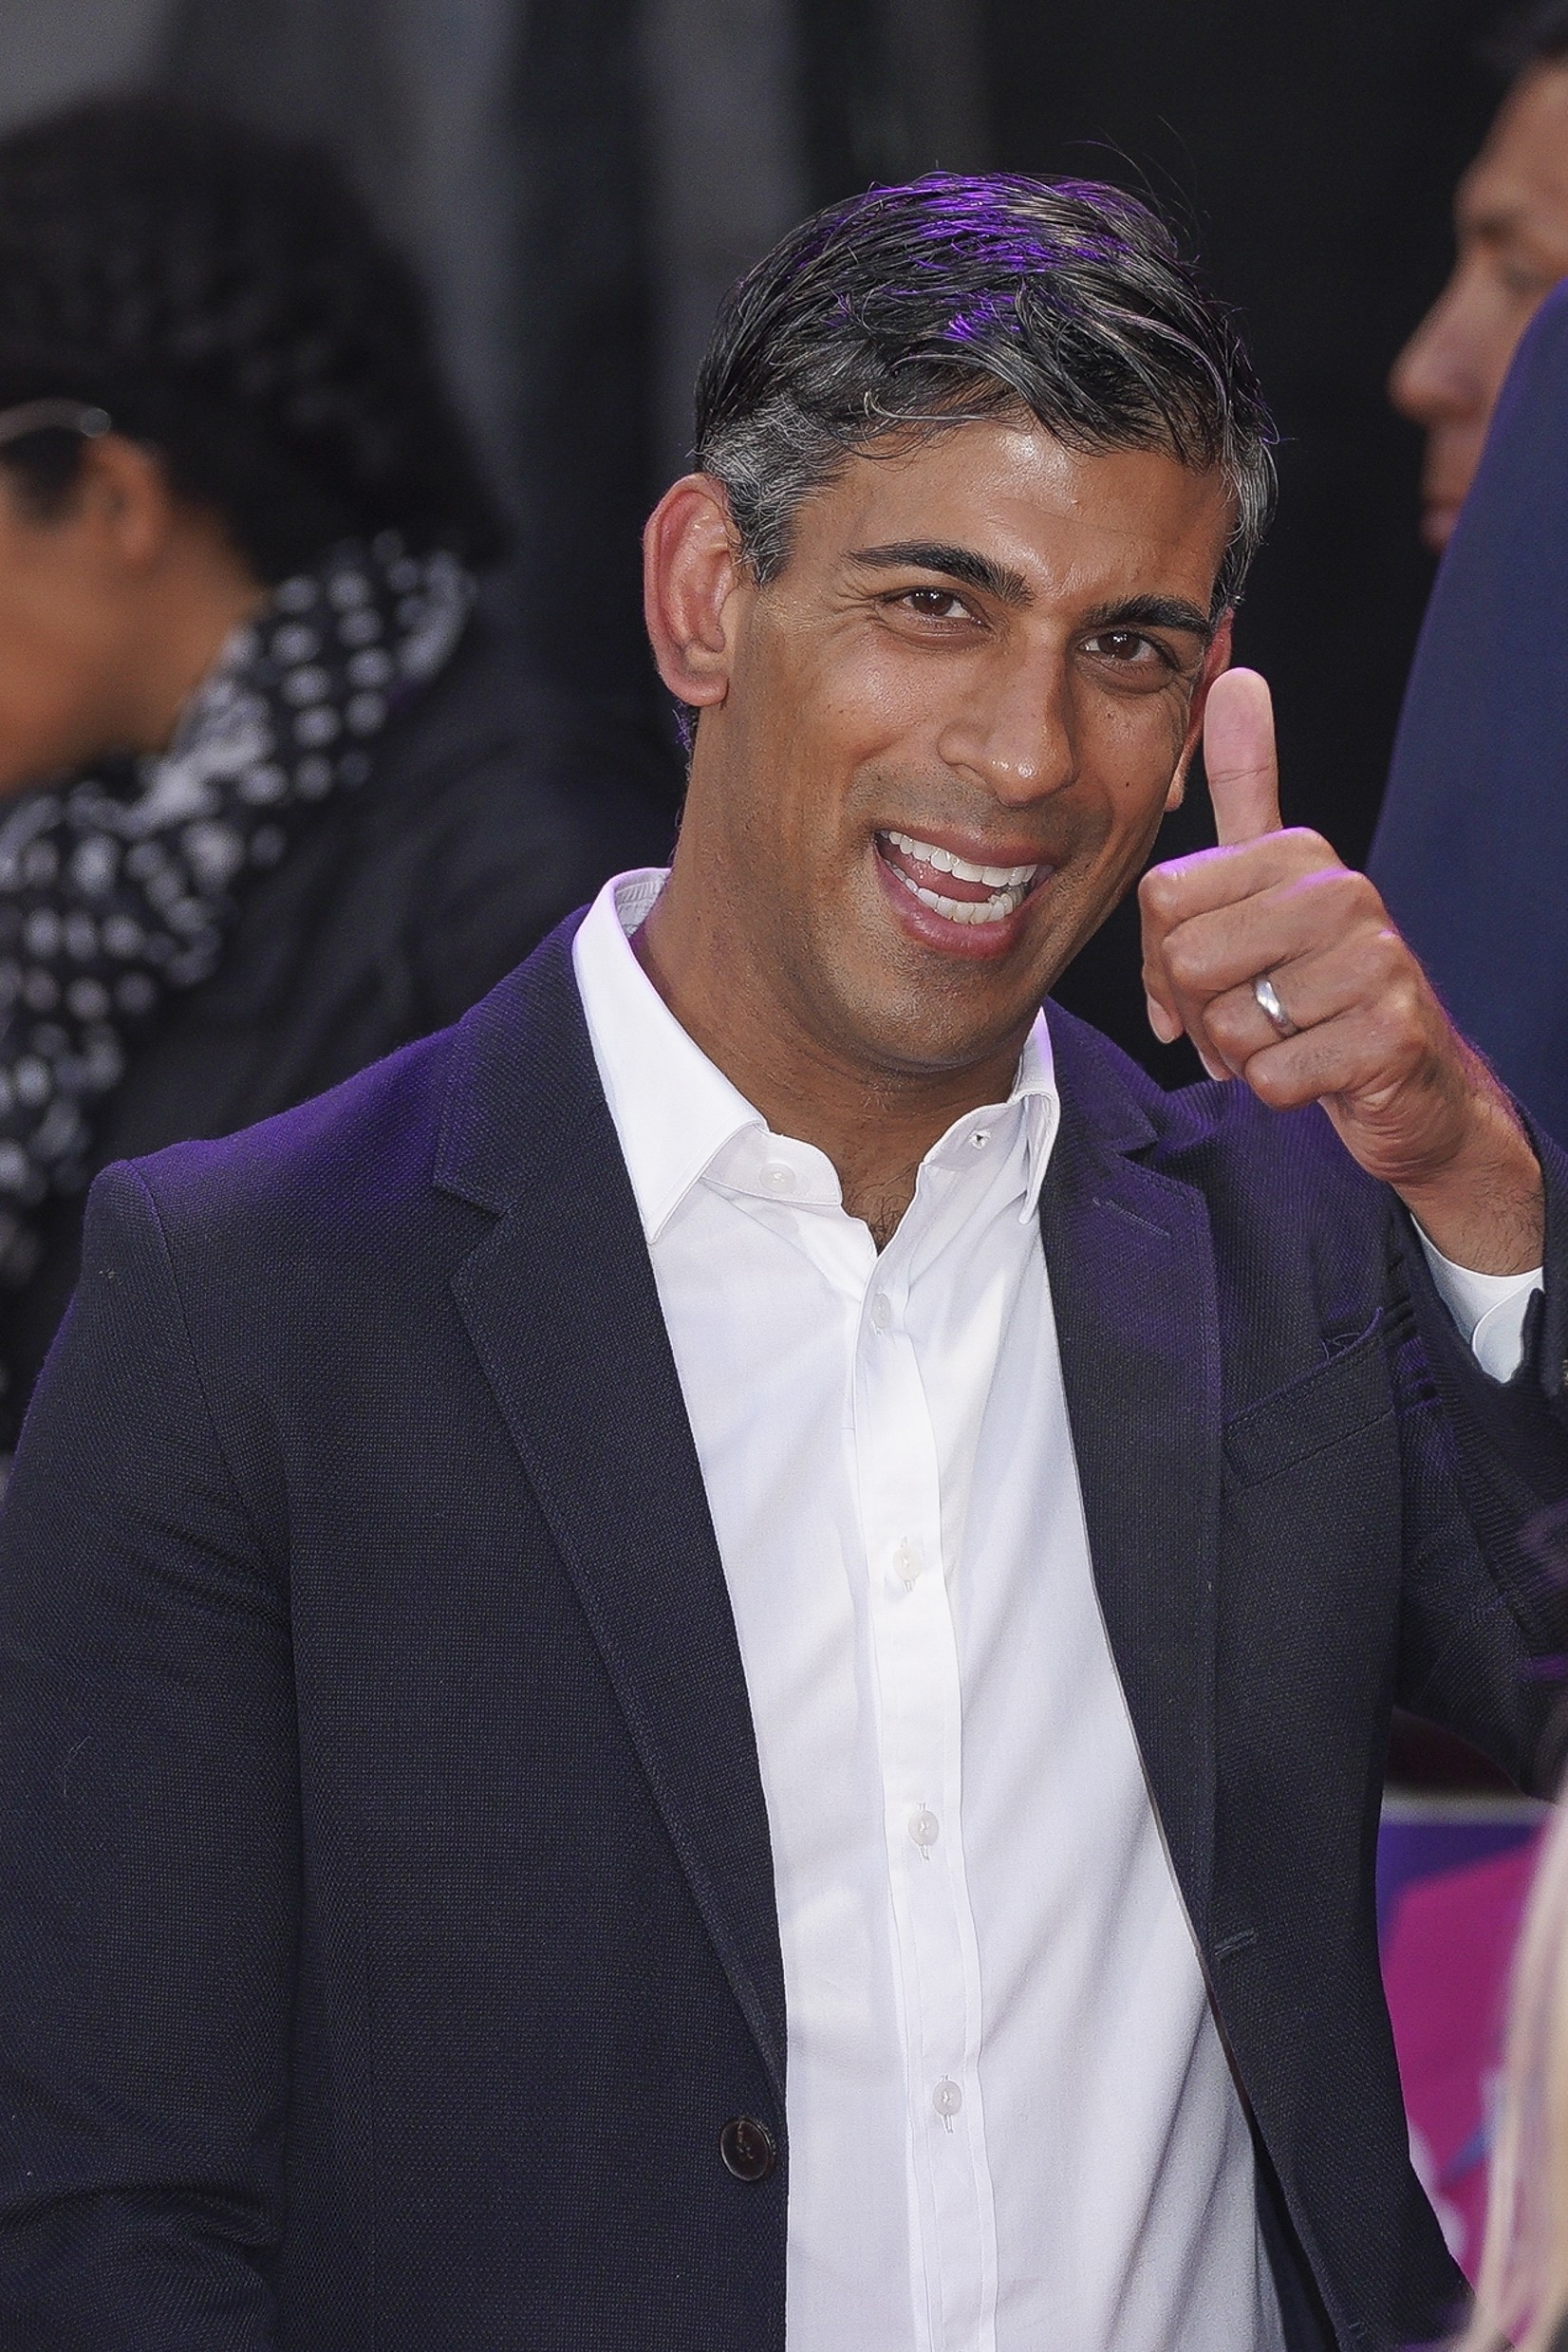 Rishi Sunak poses for photographers upon arriving at an event in London on October 5. Photo: AP